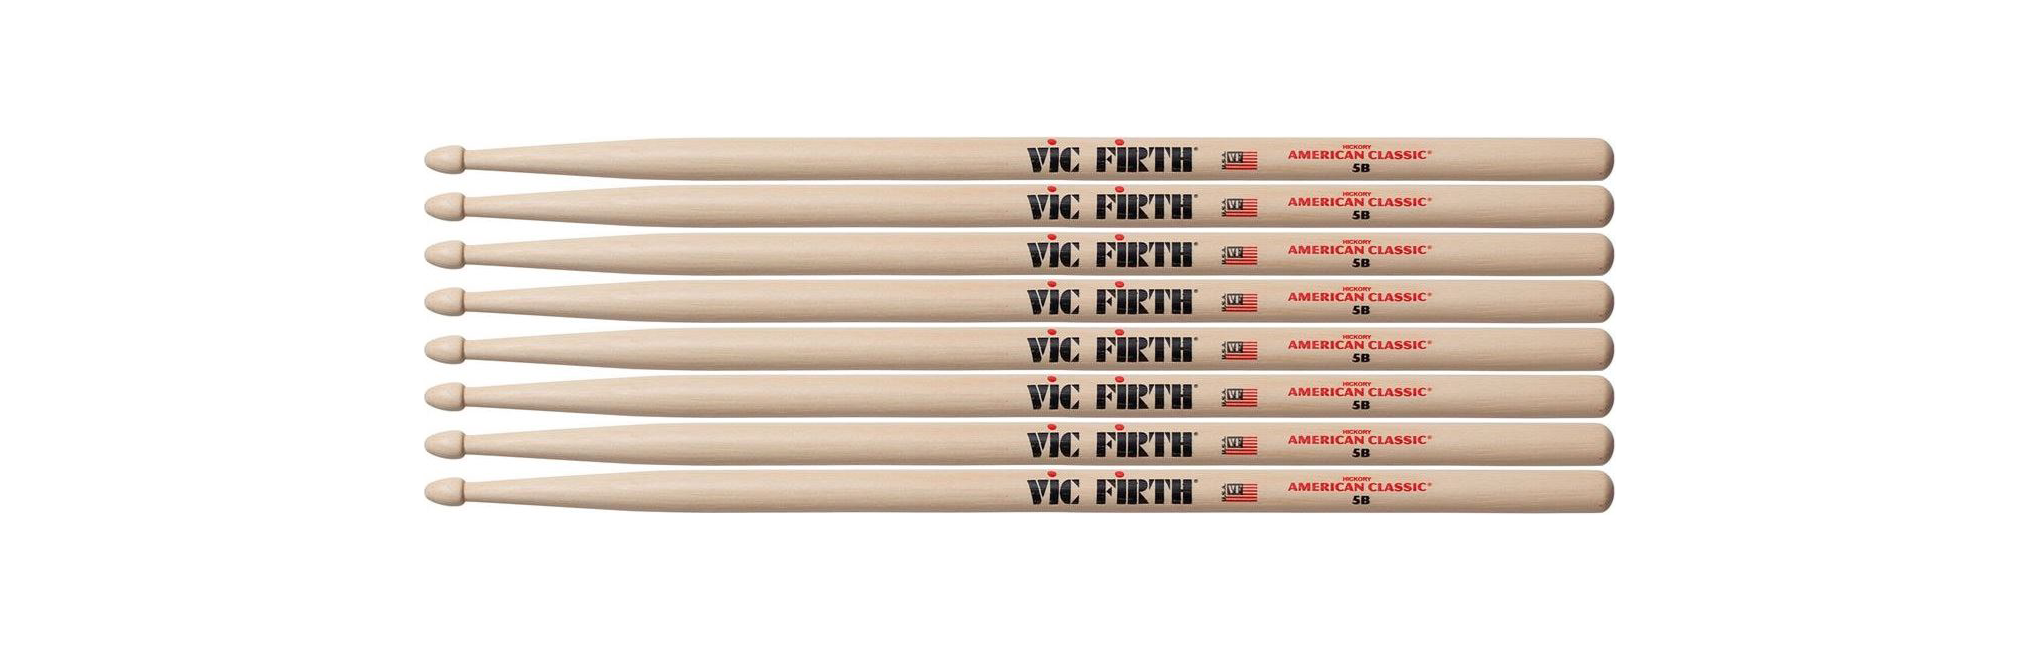 Vic Firth - 5B American Classic "Promotional 4-Pack" - Trommestikker